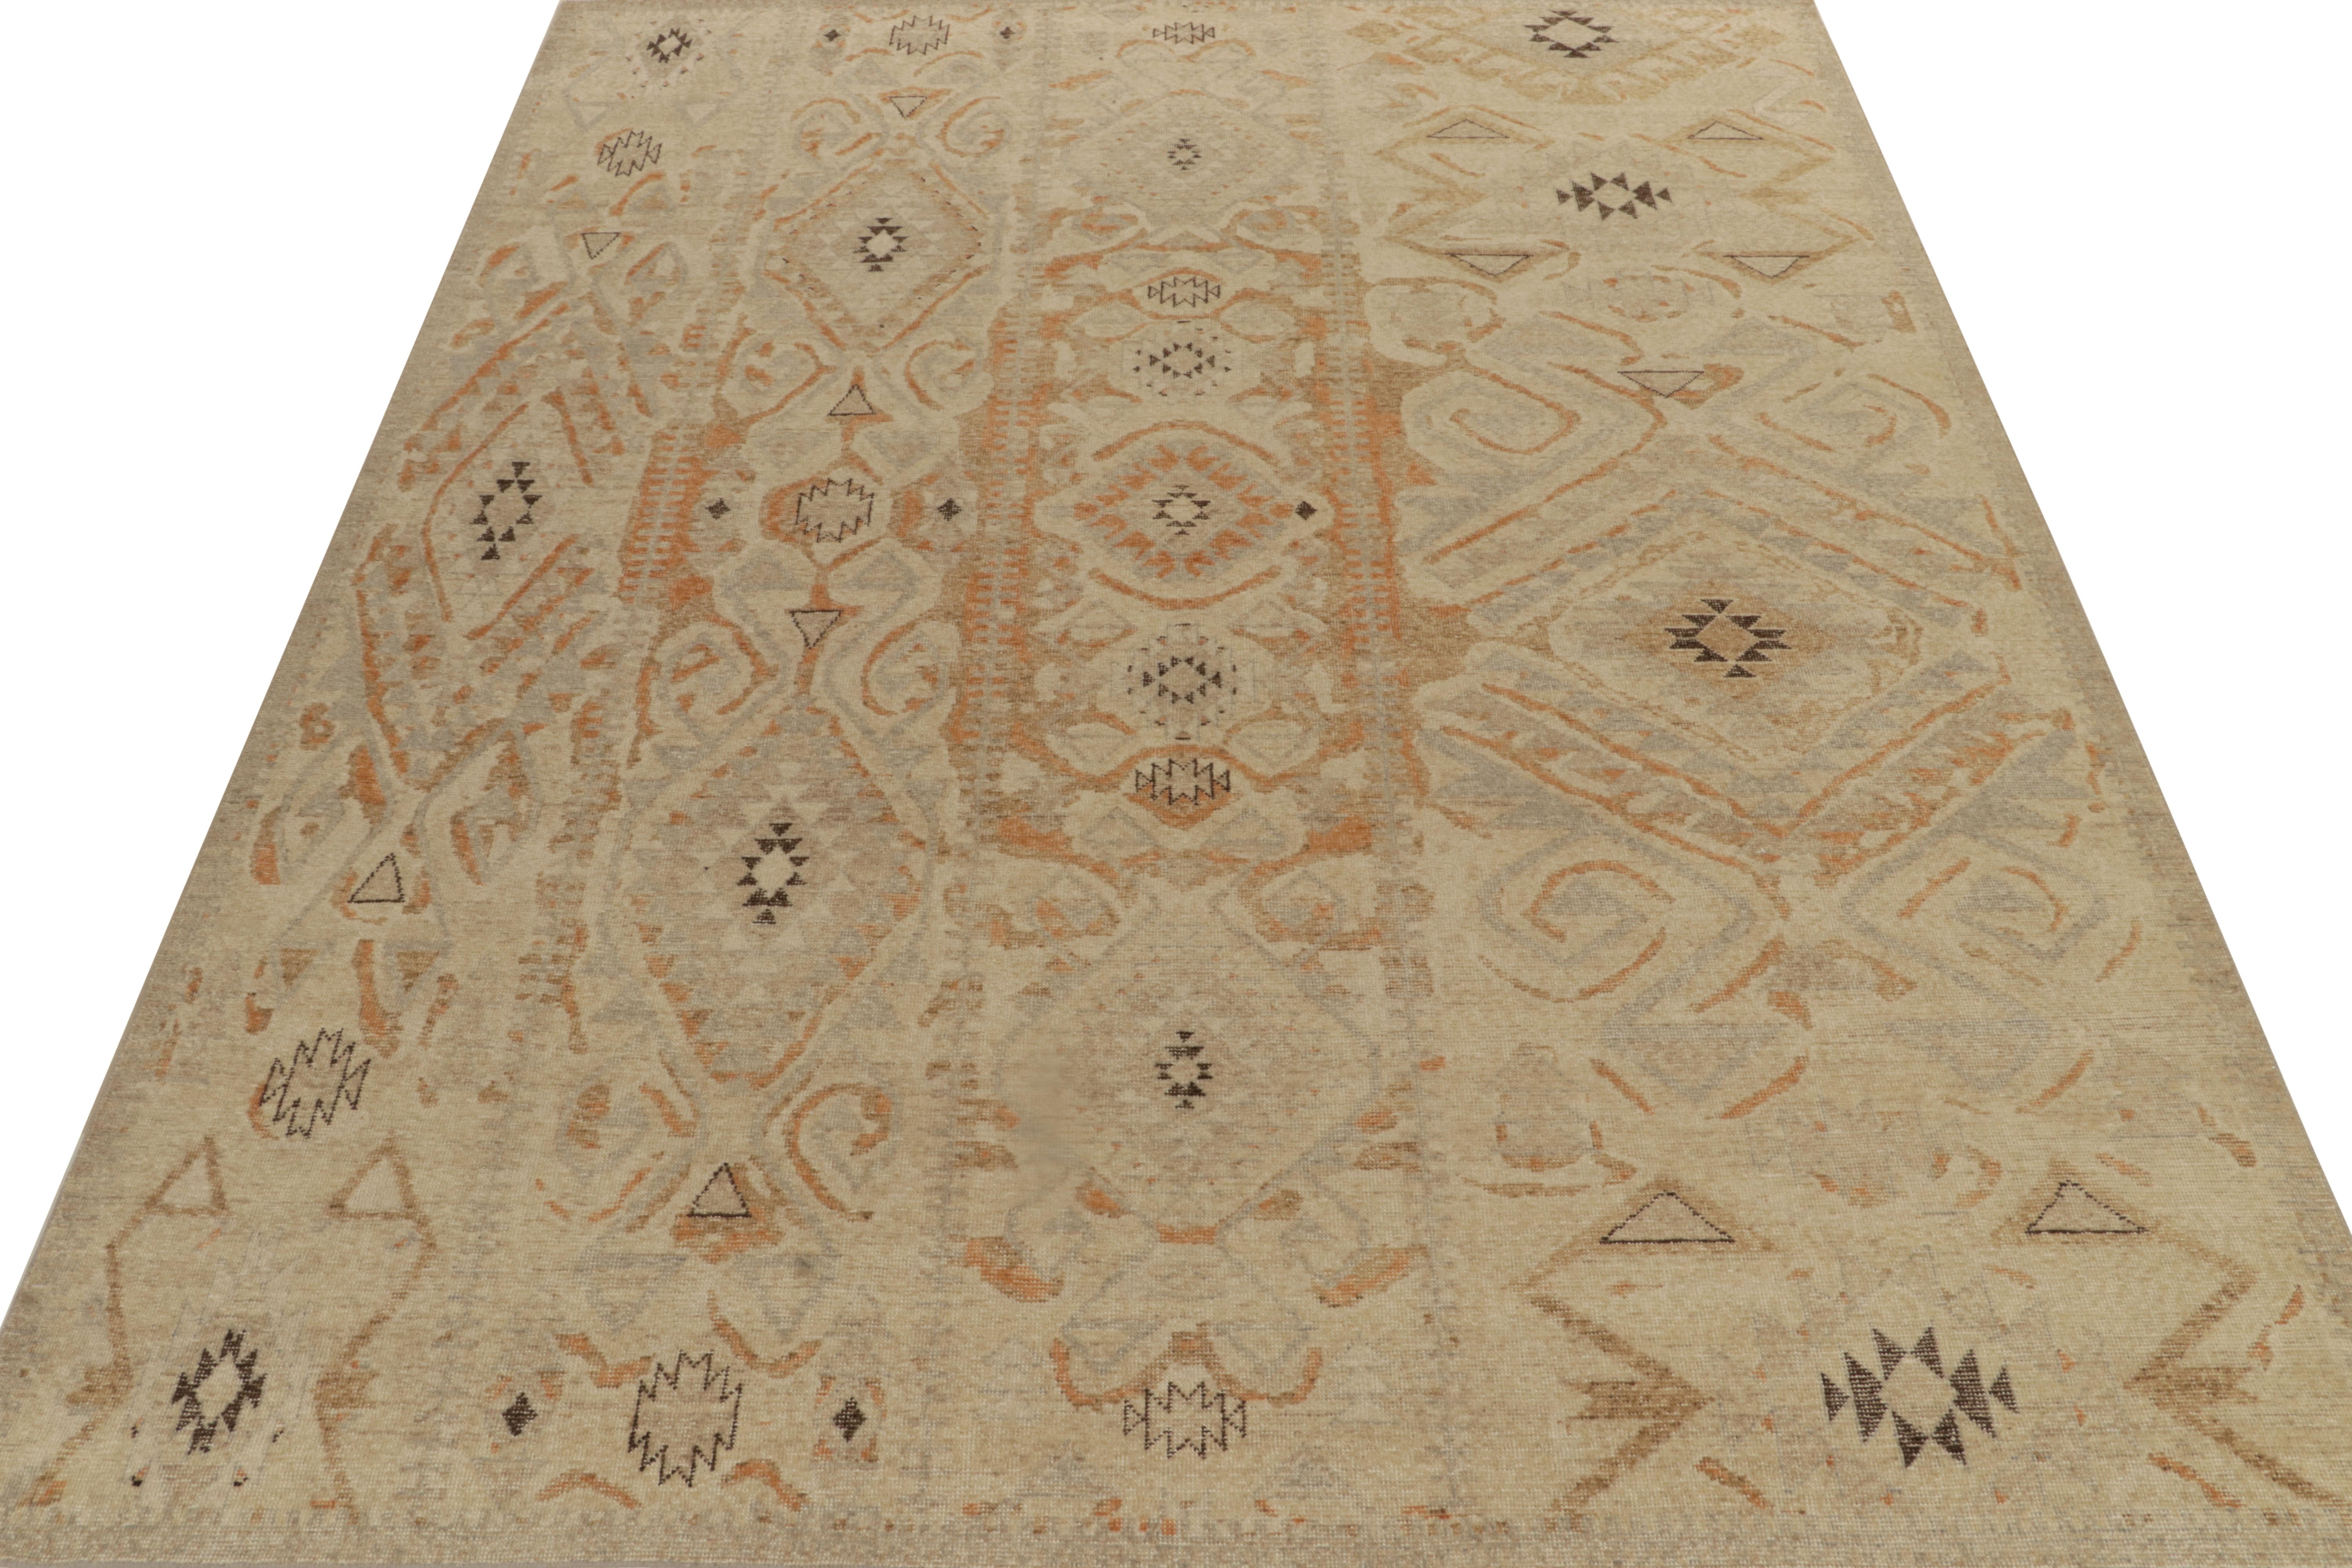 Indian Rug & Kilim’s Distressed Style Rug in Beige-Brown, Blue & Rust Tribal Patterns For Sale